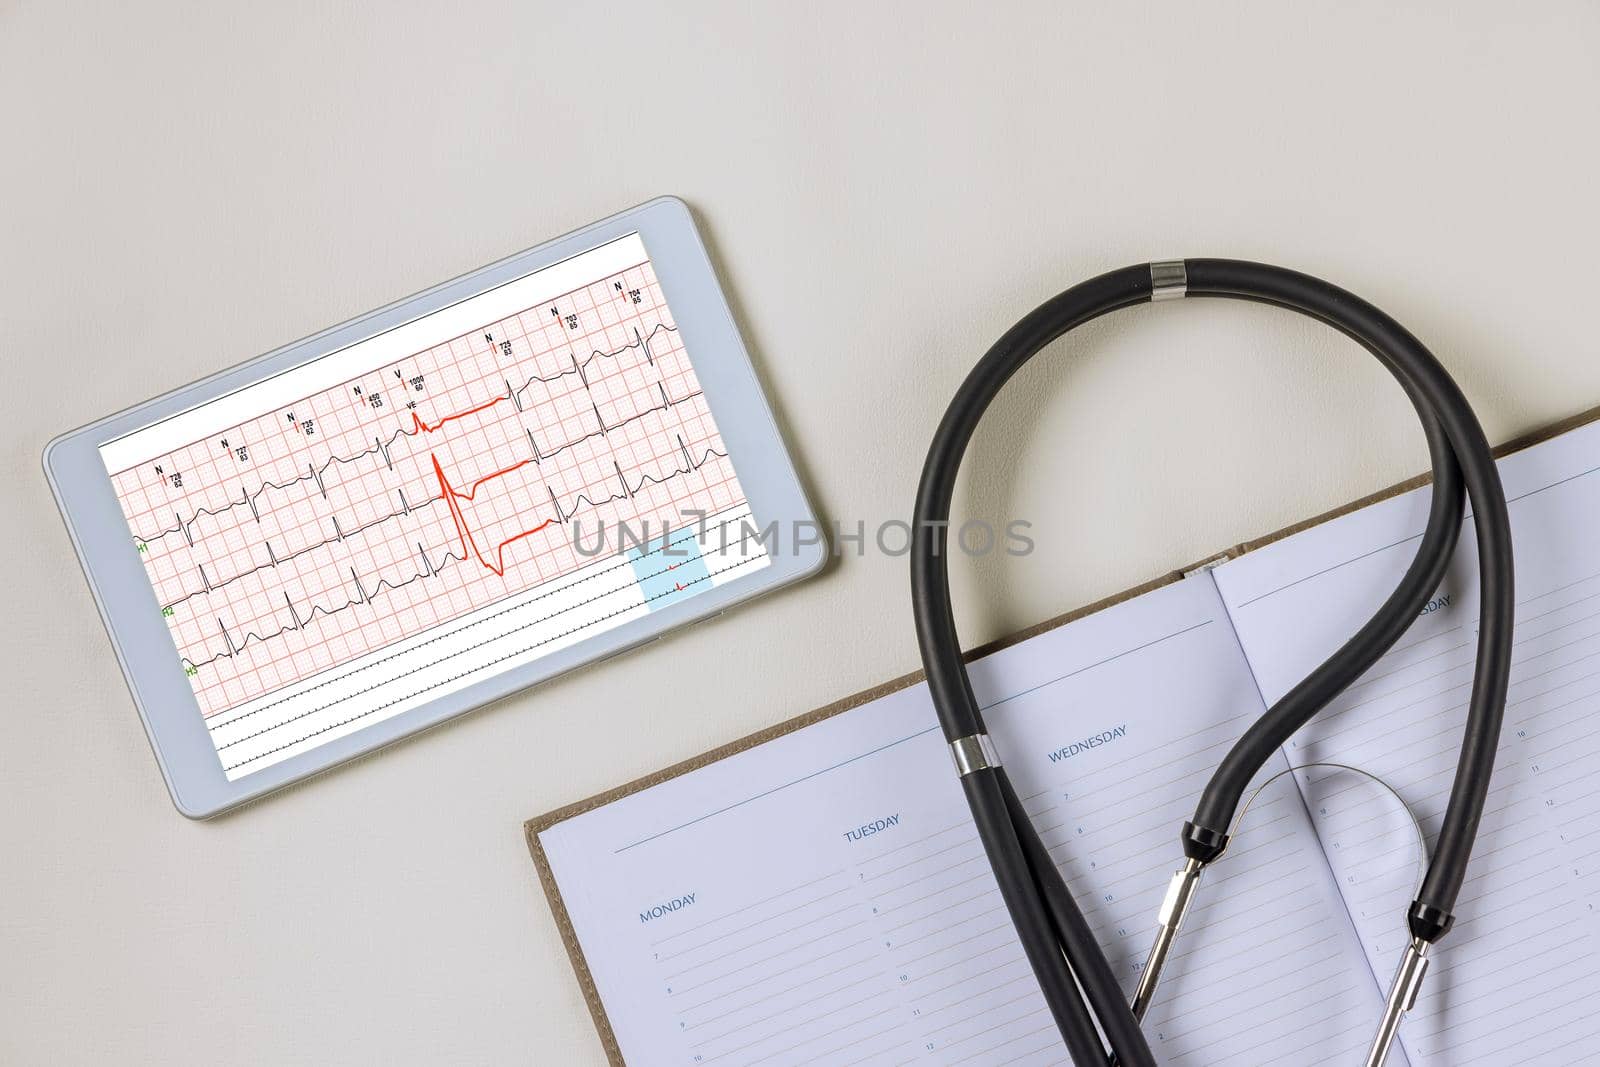 Doctor workplace with a stethoscope electrocardiogram heart rate readings on digital table